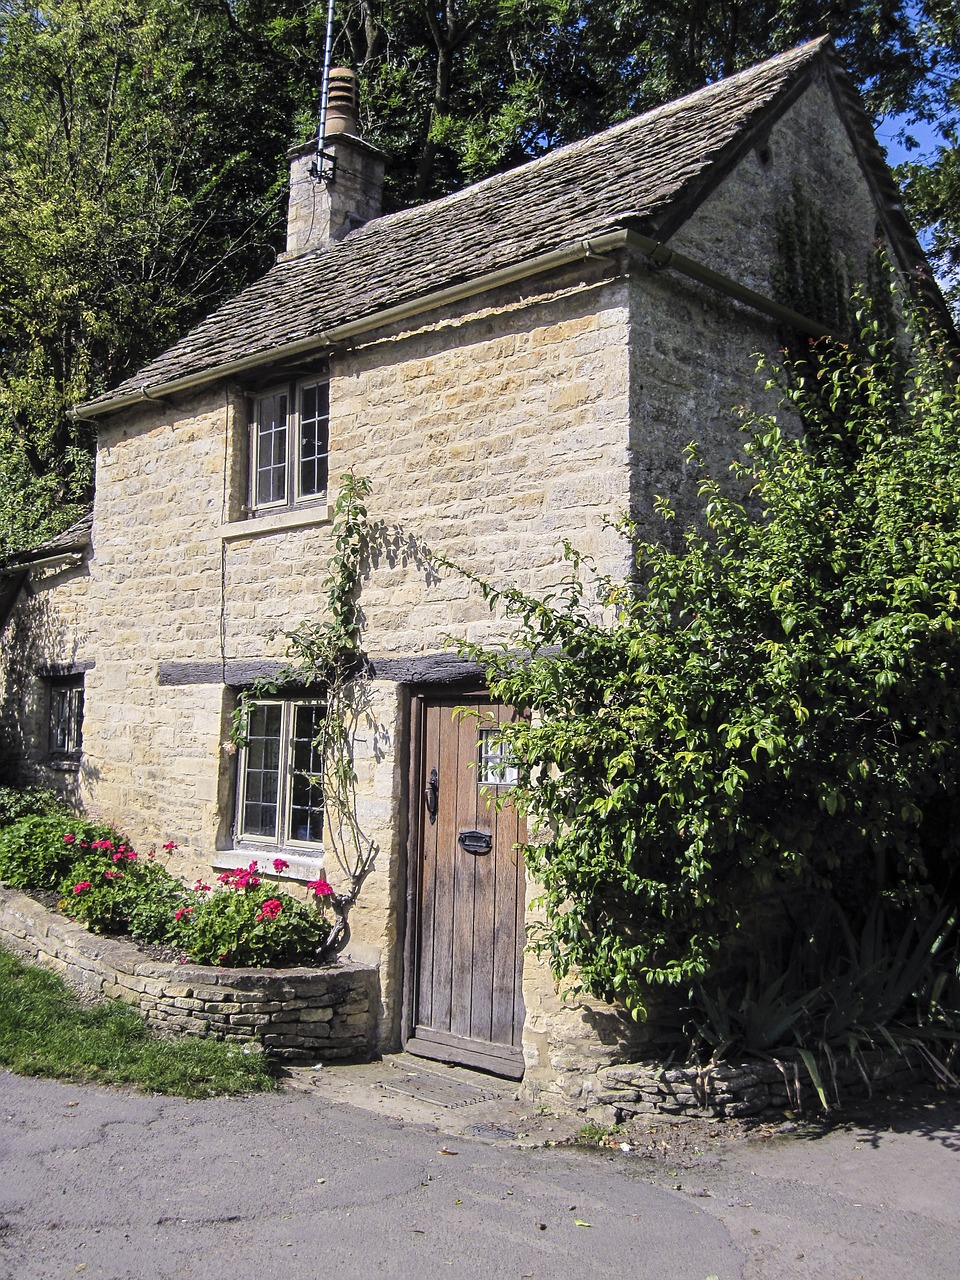 cottage,bibury,england,village,english,old,uk,architecture,british,rural,countryside,traditional,stone,gloucestershire,cotswold,quaint,free pictures, free photos, free images, royalty free, free illustrations, public domain